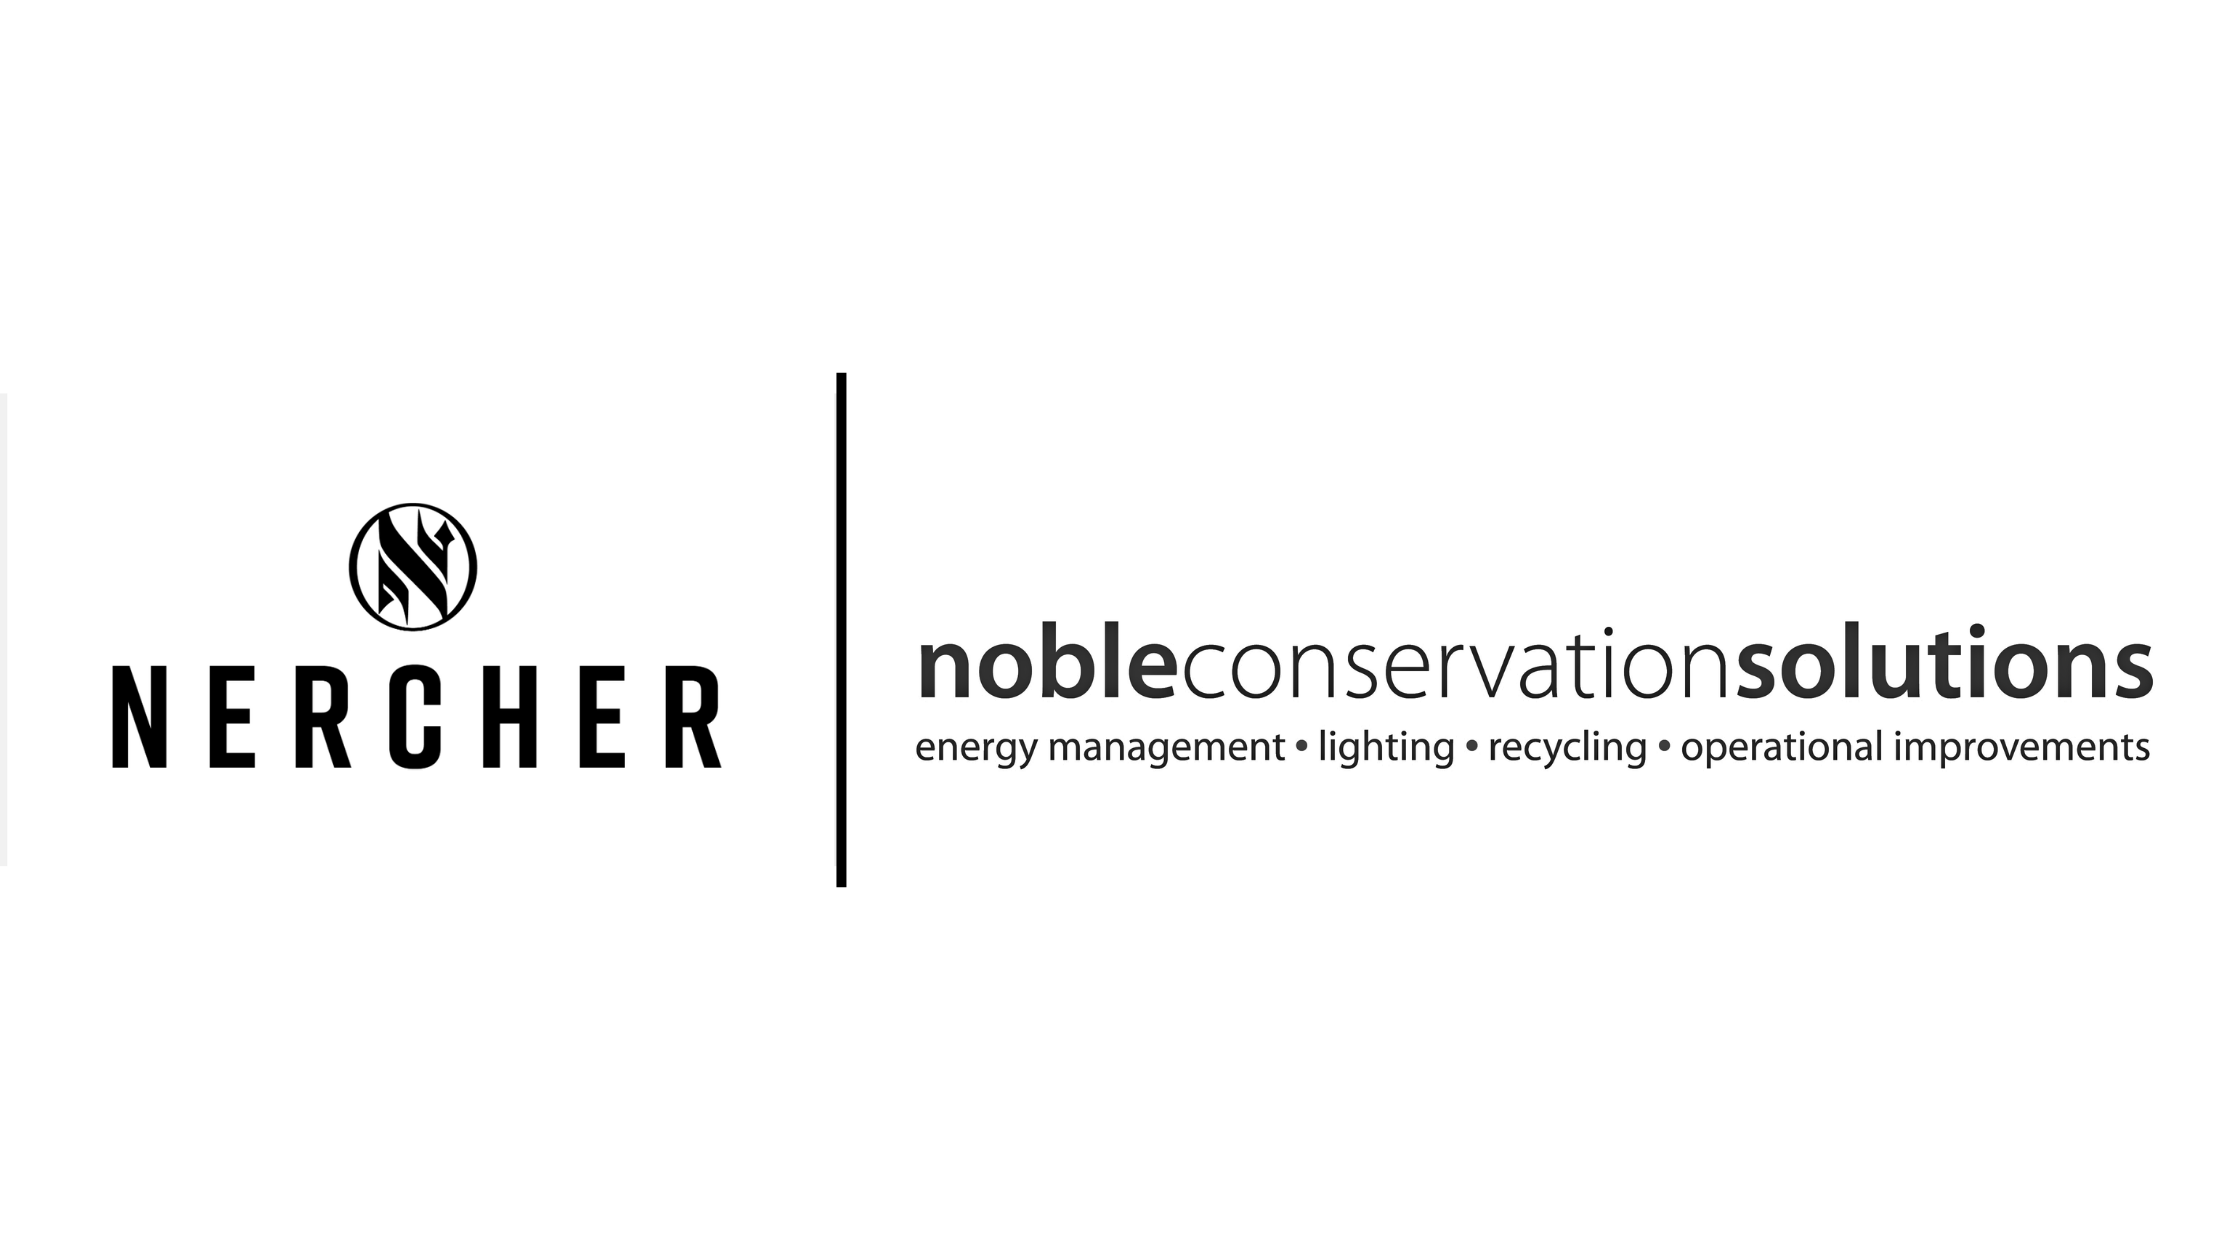 Noble Conservation Solutions Partners with Nercher360 for Sales Process and Pipeline Management